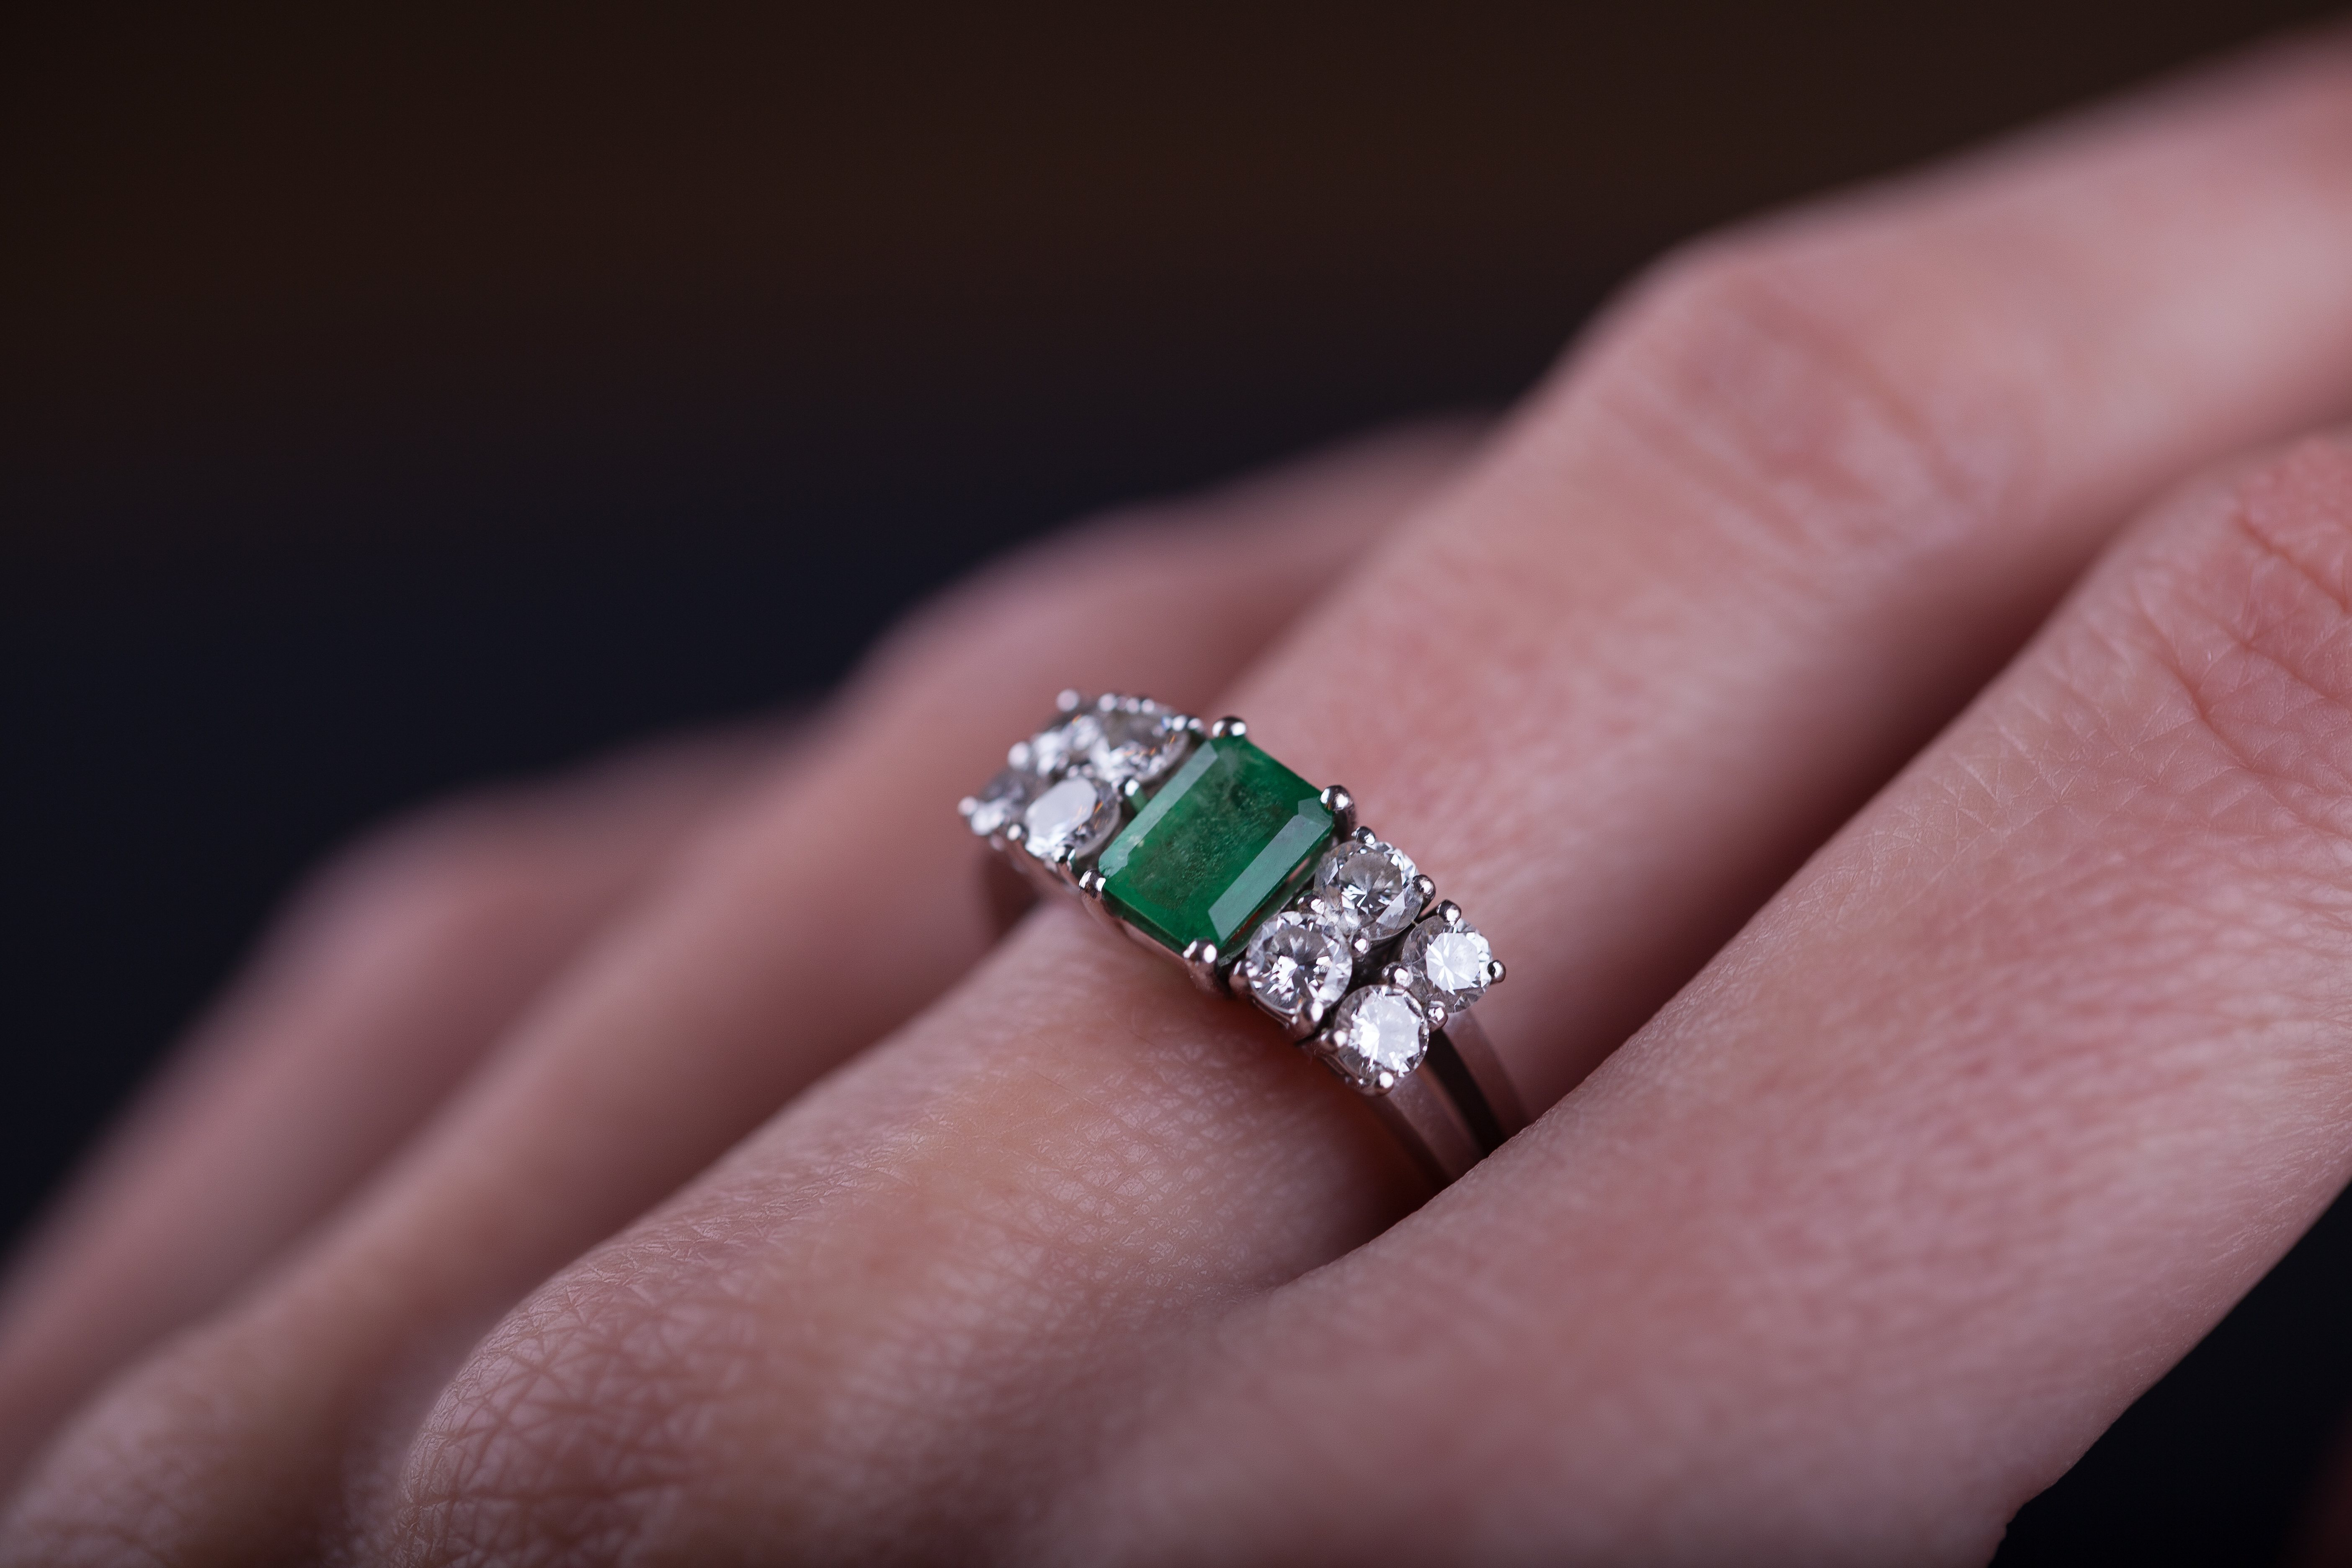 Emerald and diamond ring in finger | Source: Getty Images